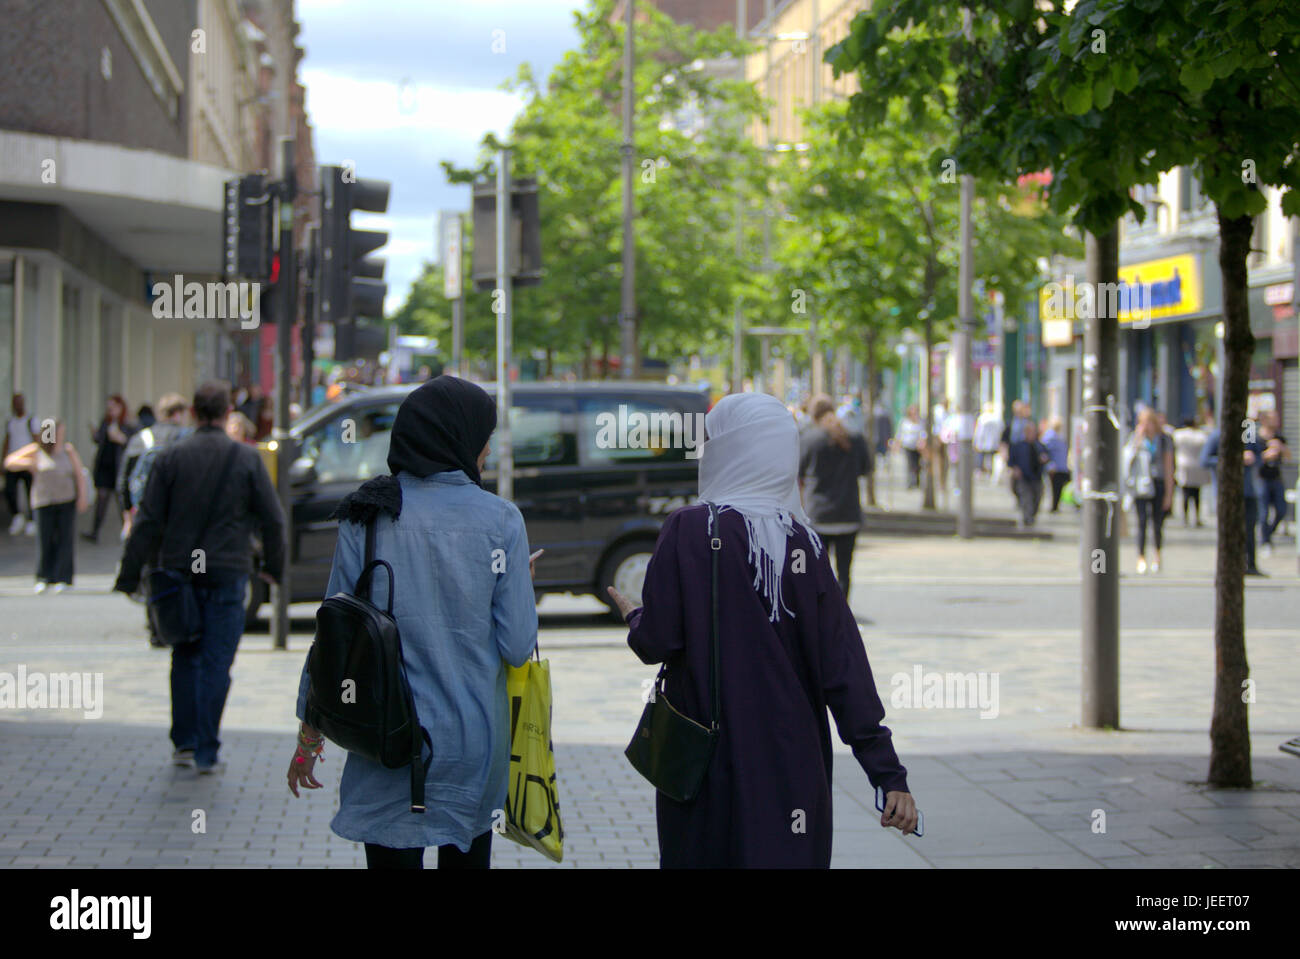 Asian family refugee dressed Hijab scarf on street in the UK everyday scene two young girls shopping Stock Photo